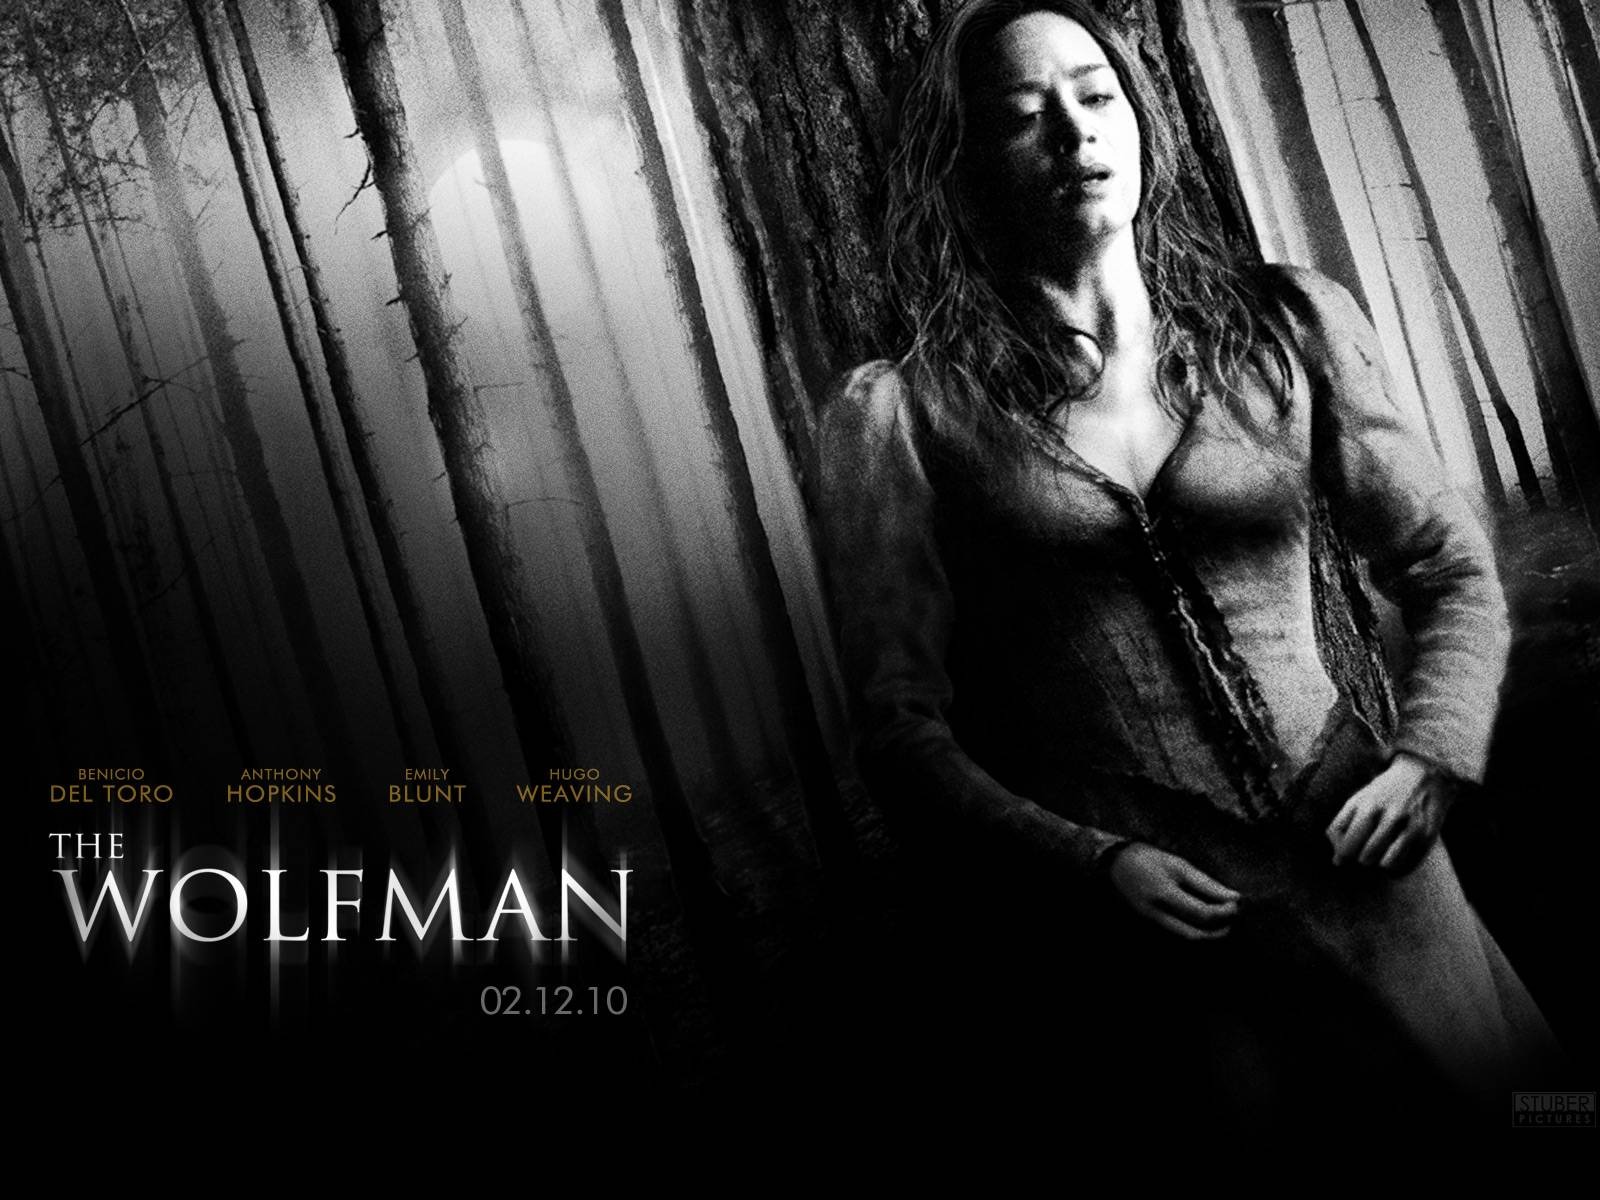 The Wolfman Movie Wallpapers #10 - 1600x1200